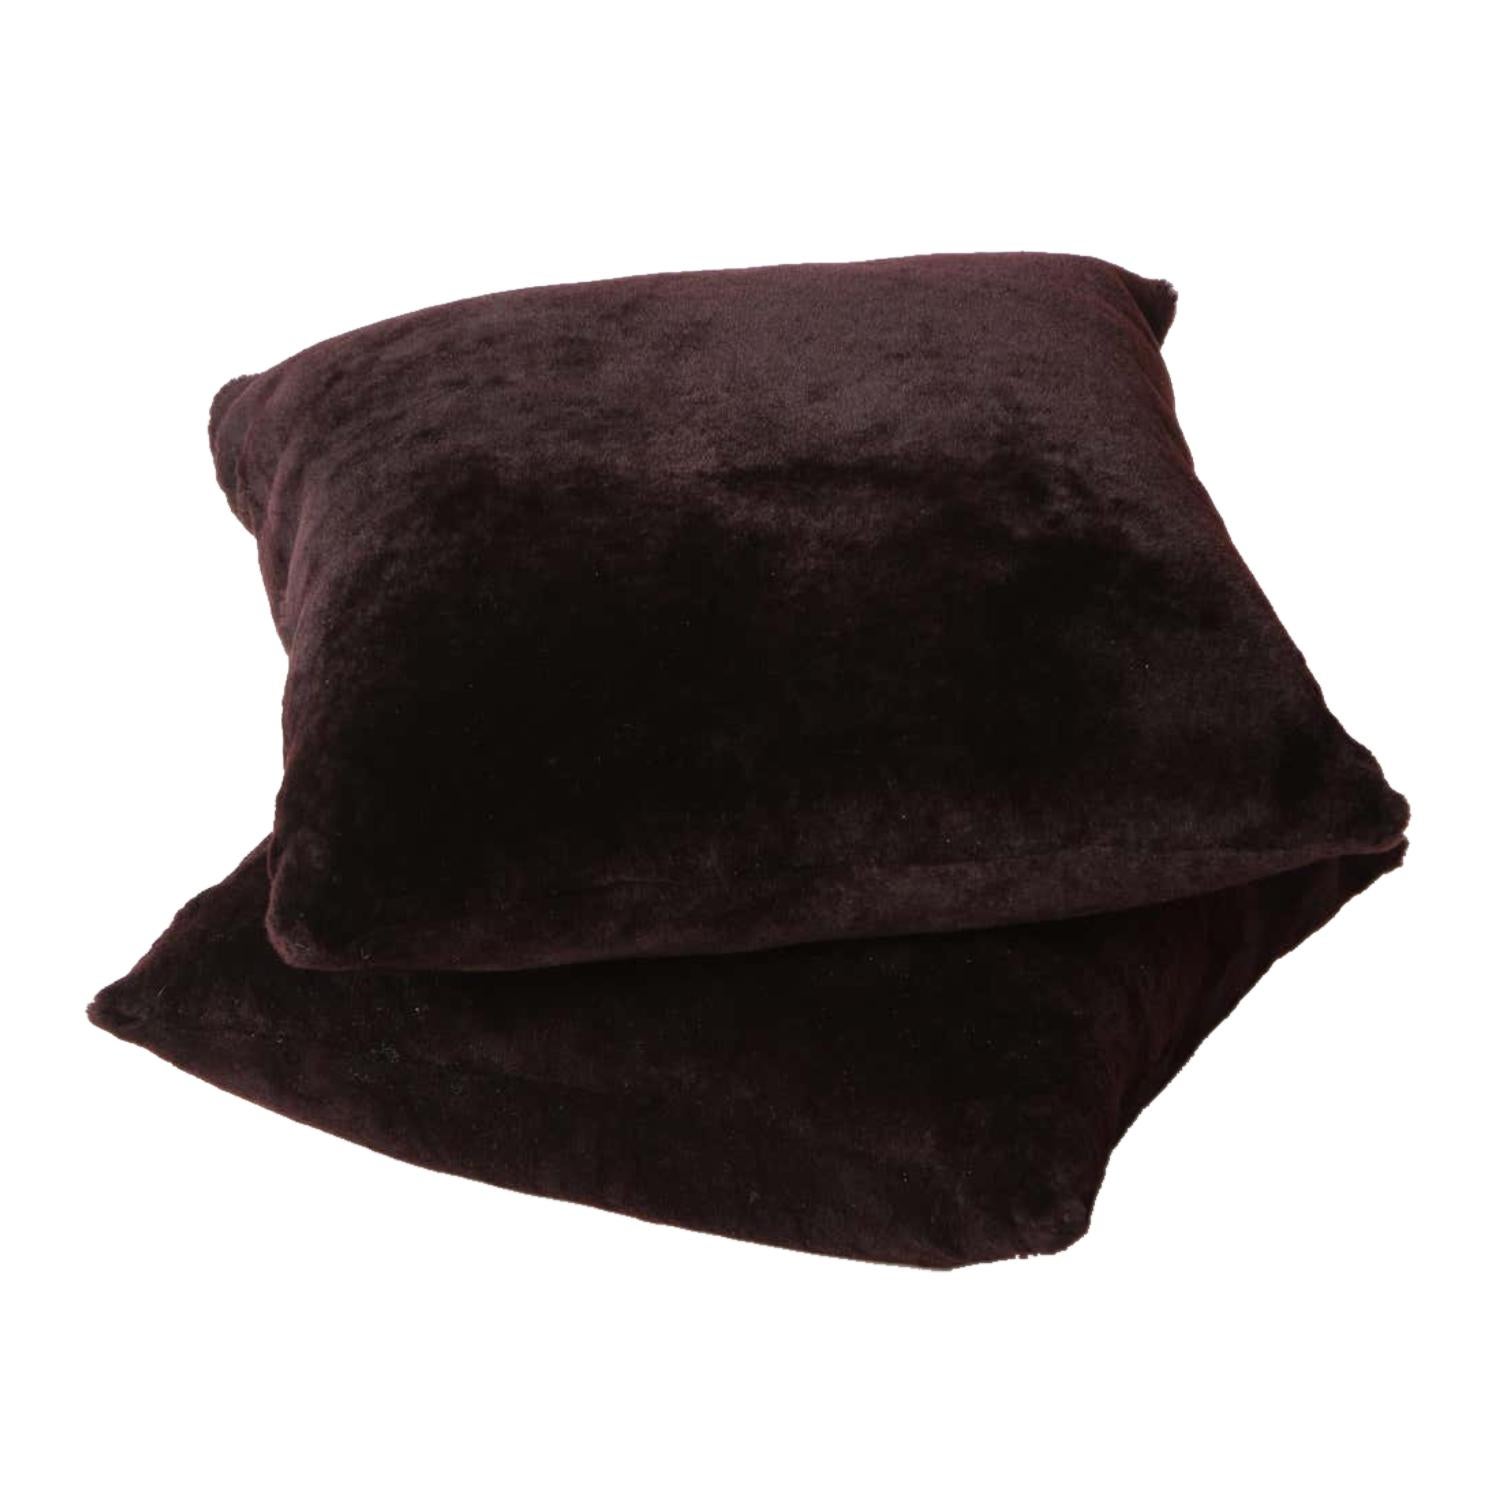 Modern Double Sided Merino Short Hair Shearling Pillow in Deep Plum Color For Sale